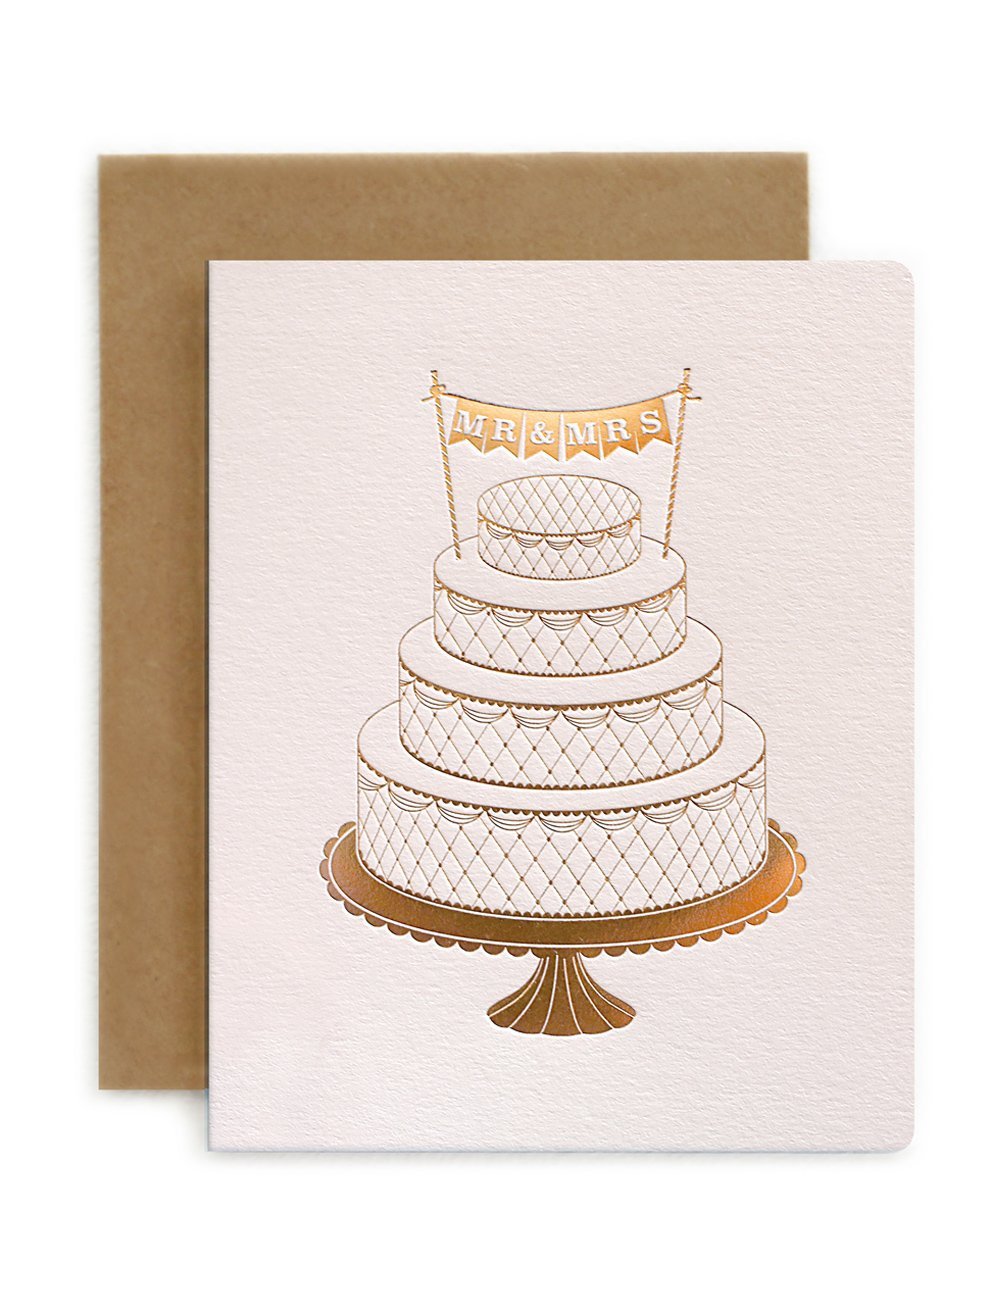 “Mr and Mrs” wedding card